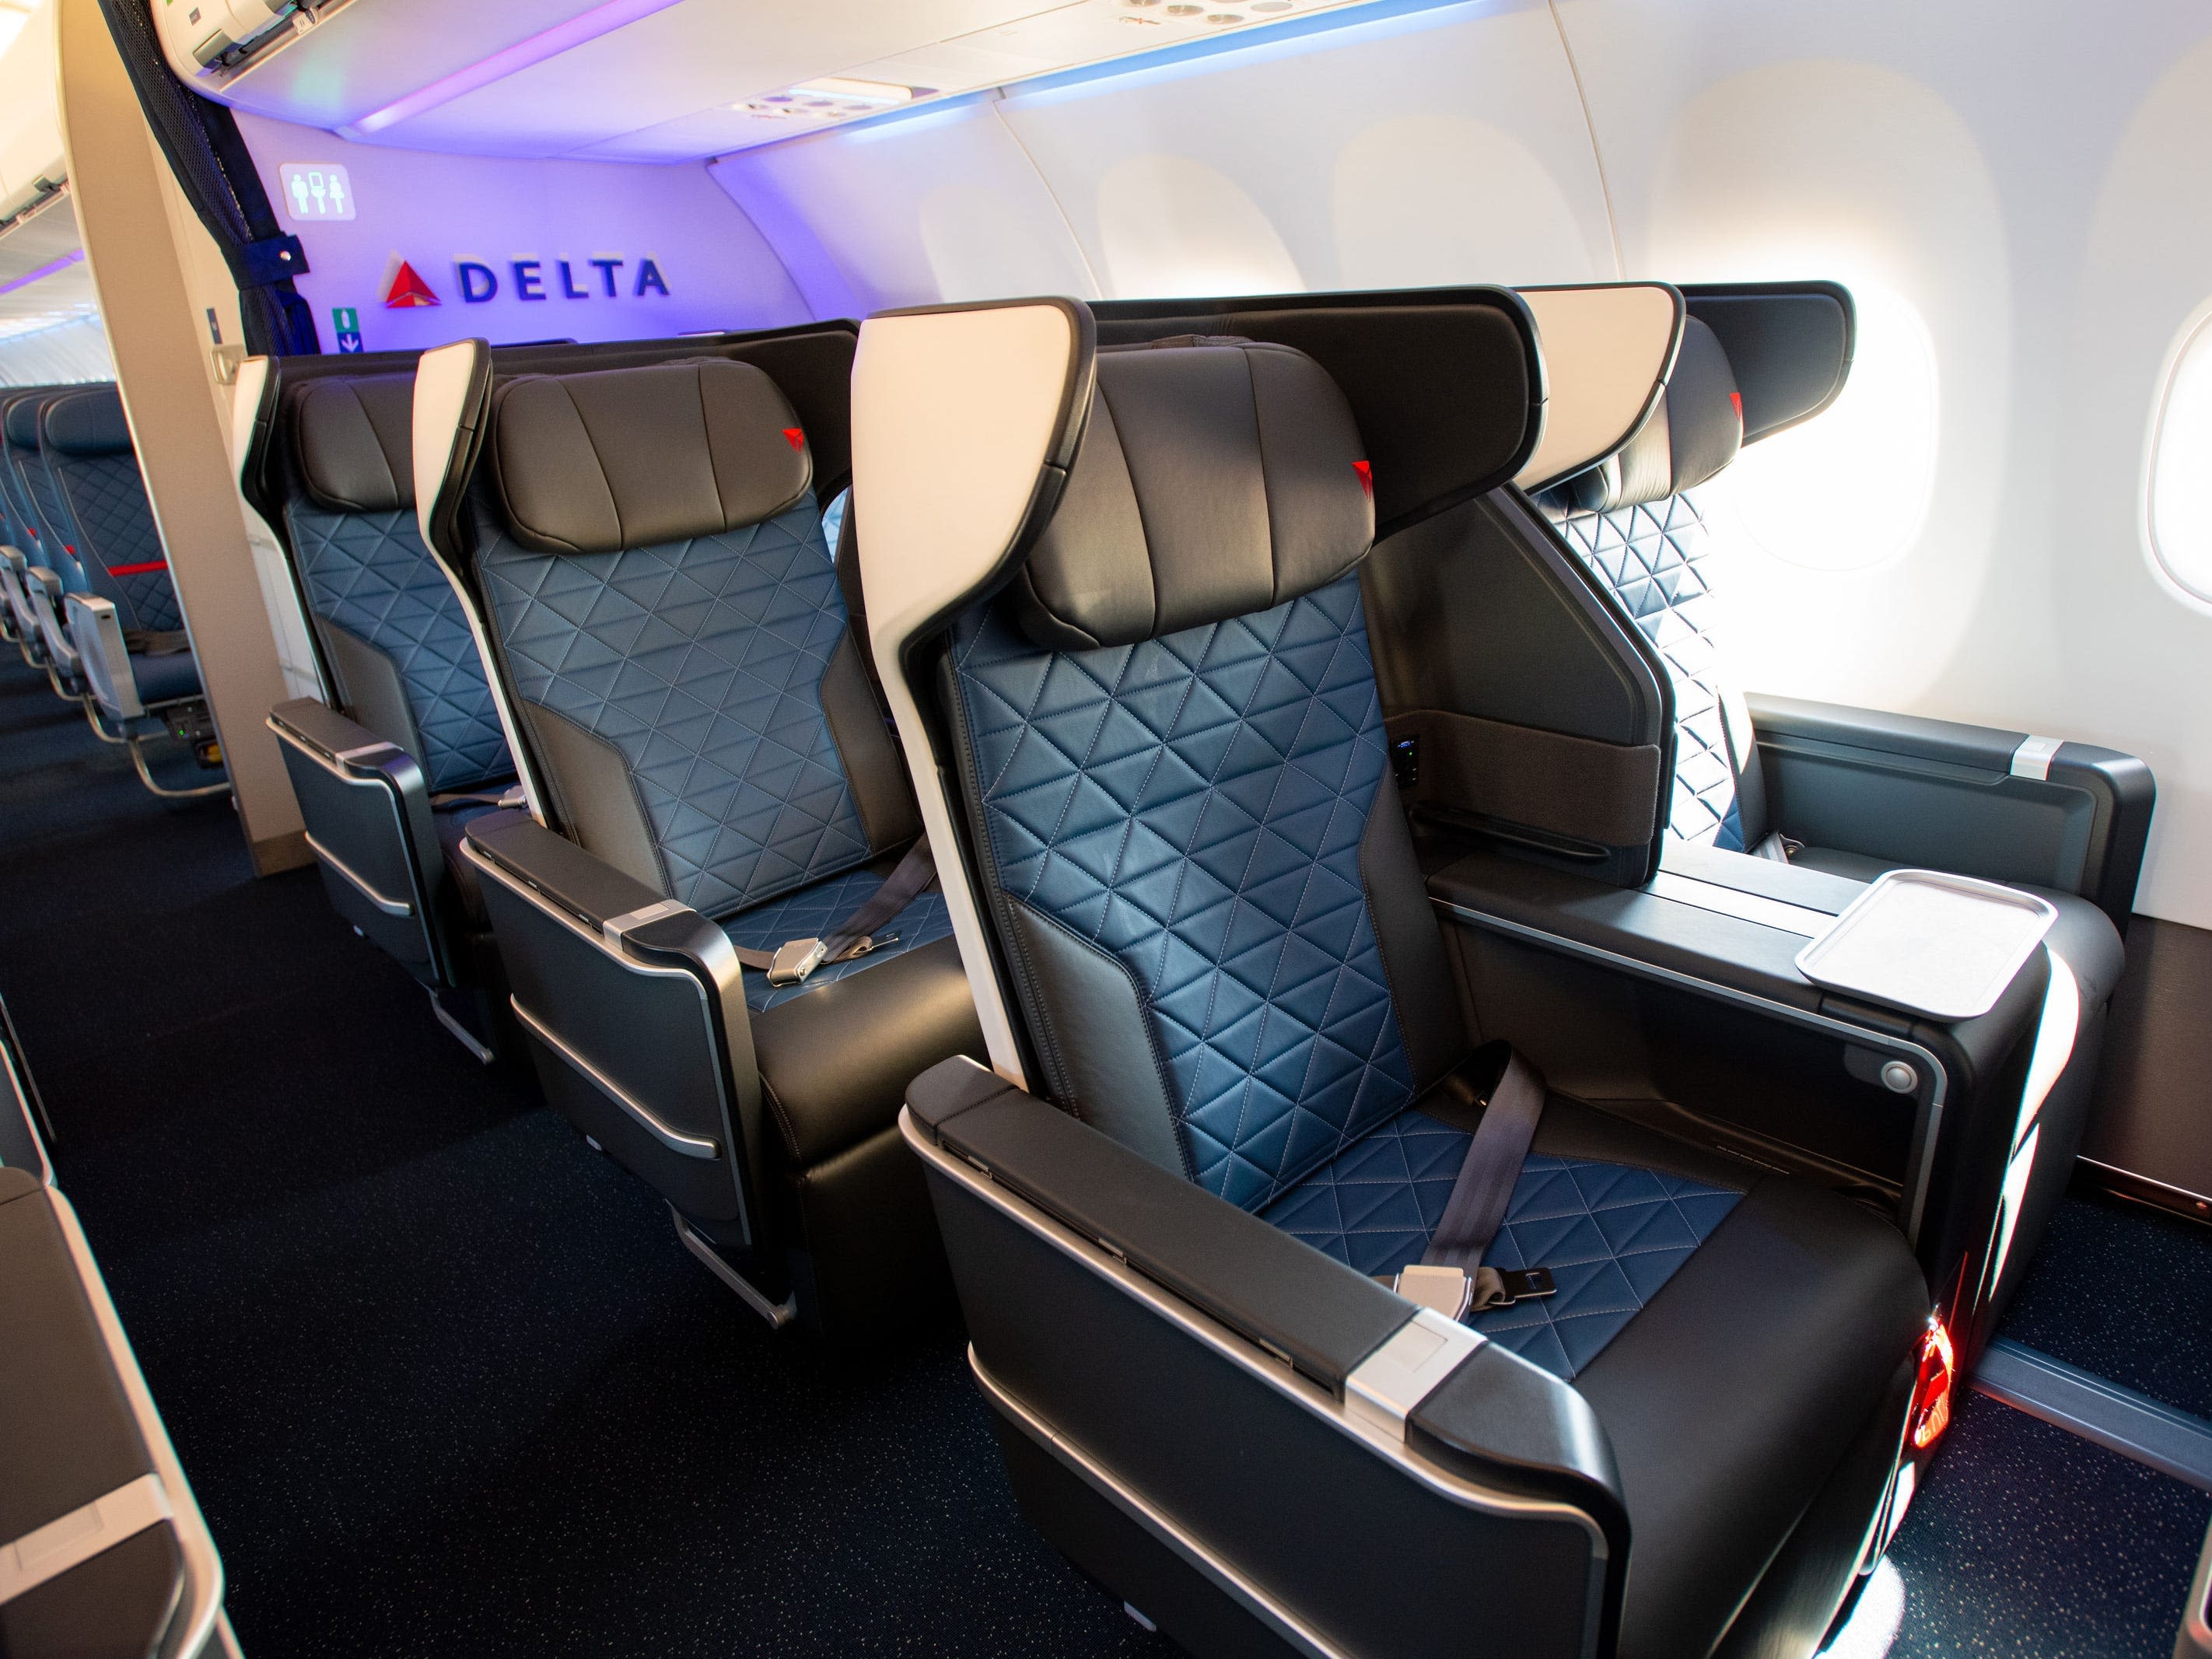 Delta has the best first class and Southwest has the best economy seats — see JD Power's airline rankings